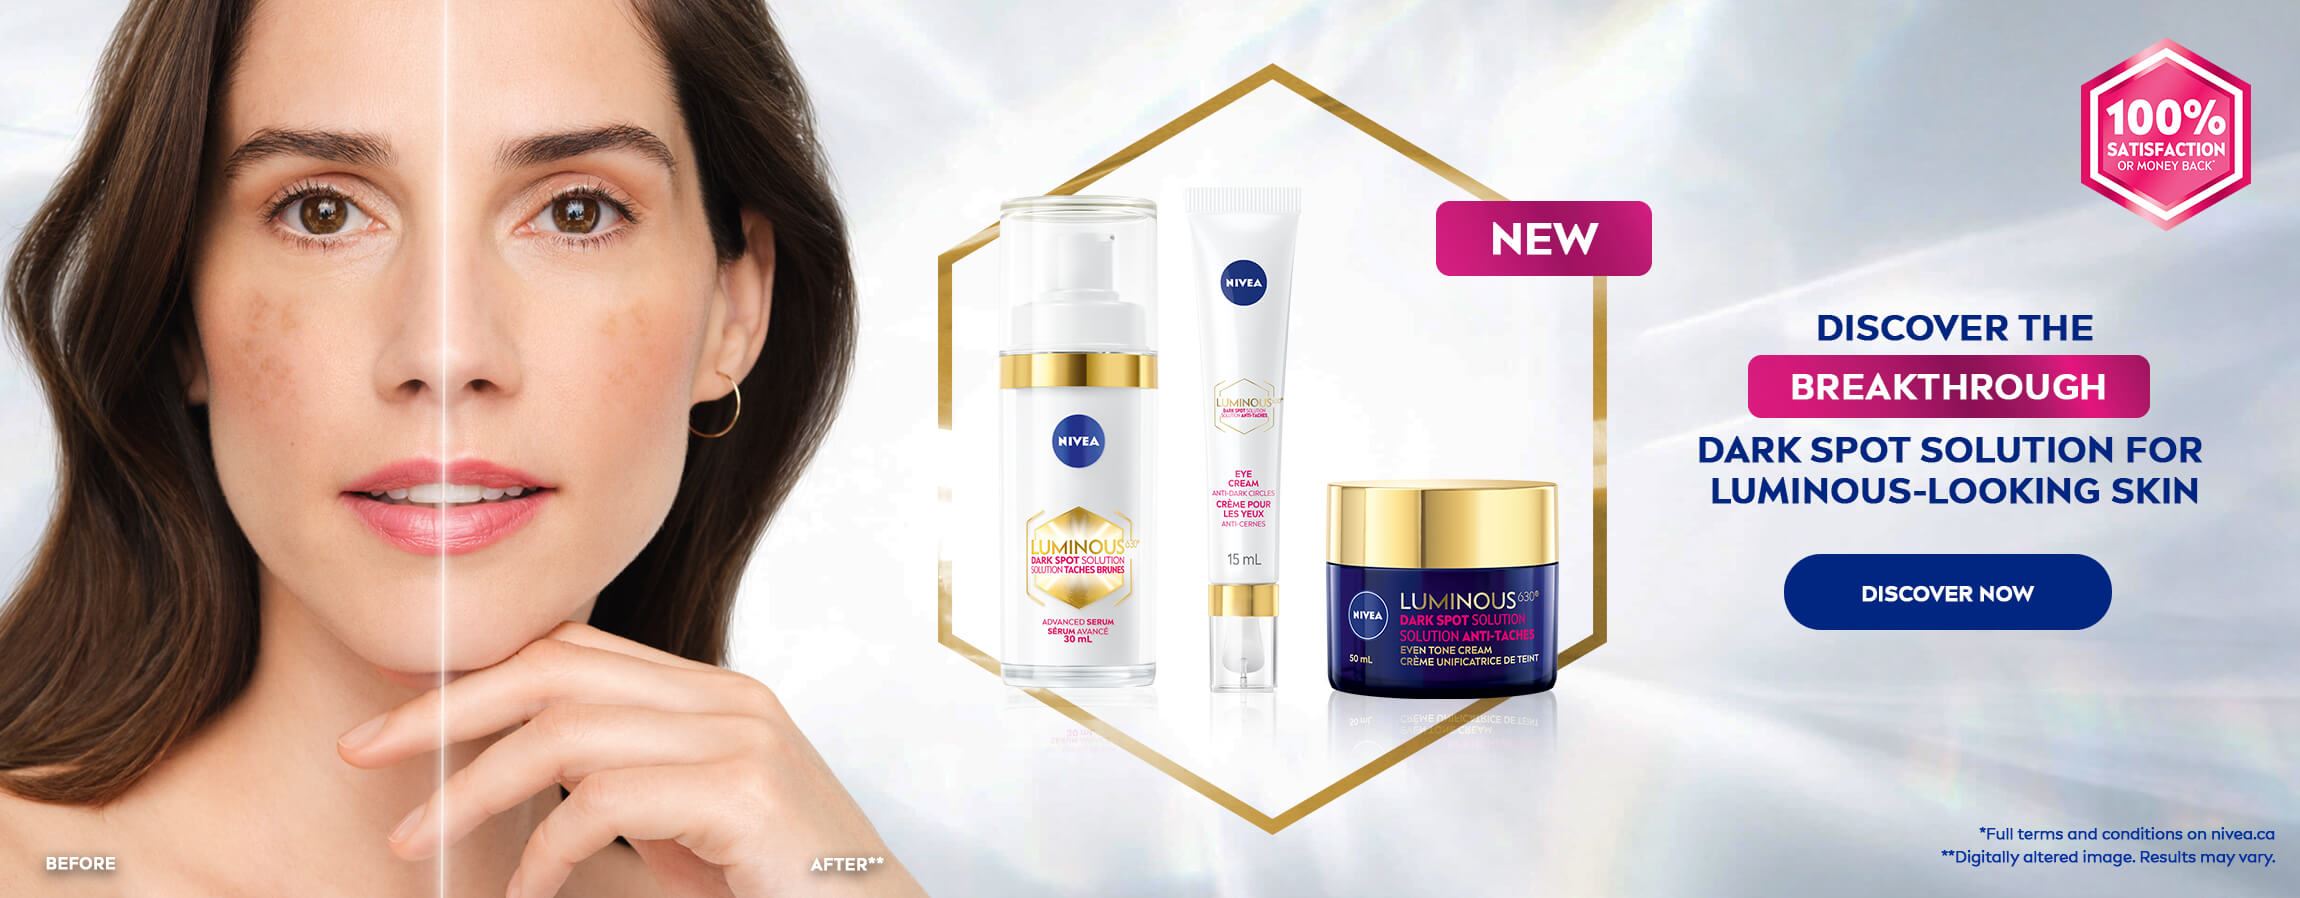 A view of a person facing forward while showing a side by side before and after comparison of their skin tone and texture, with three Nivea Luminous 630 skincare products in the background.